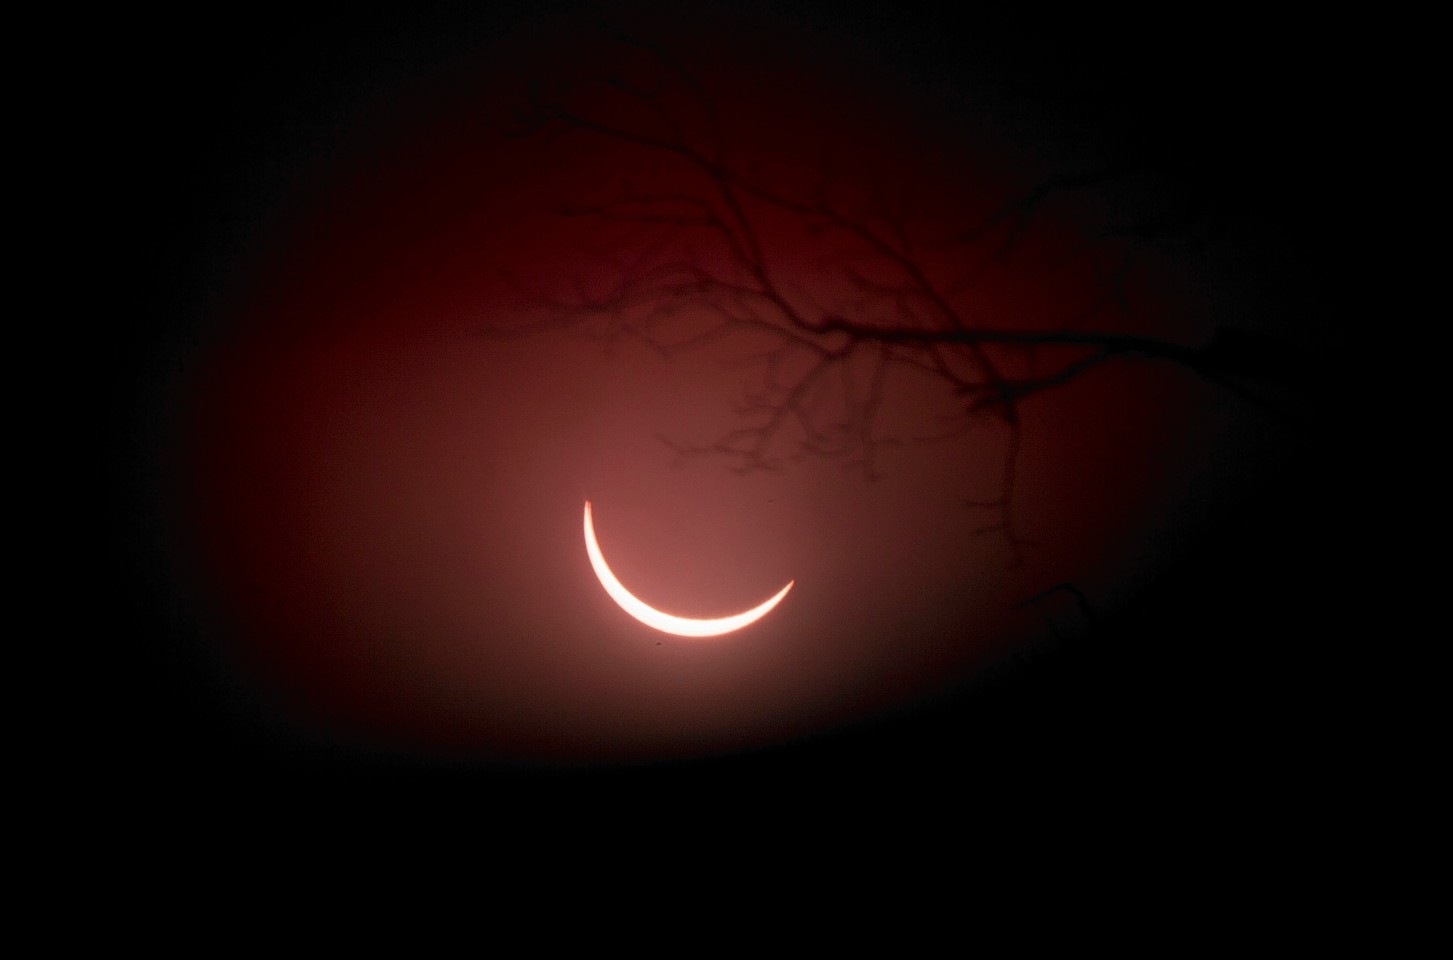 Yesterday's eclipse produced some stunning images and some sore eyes along the way